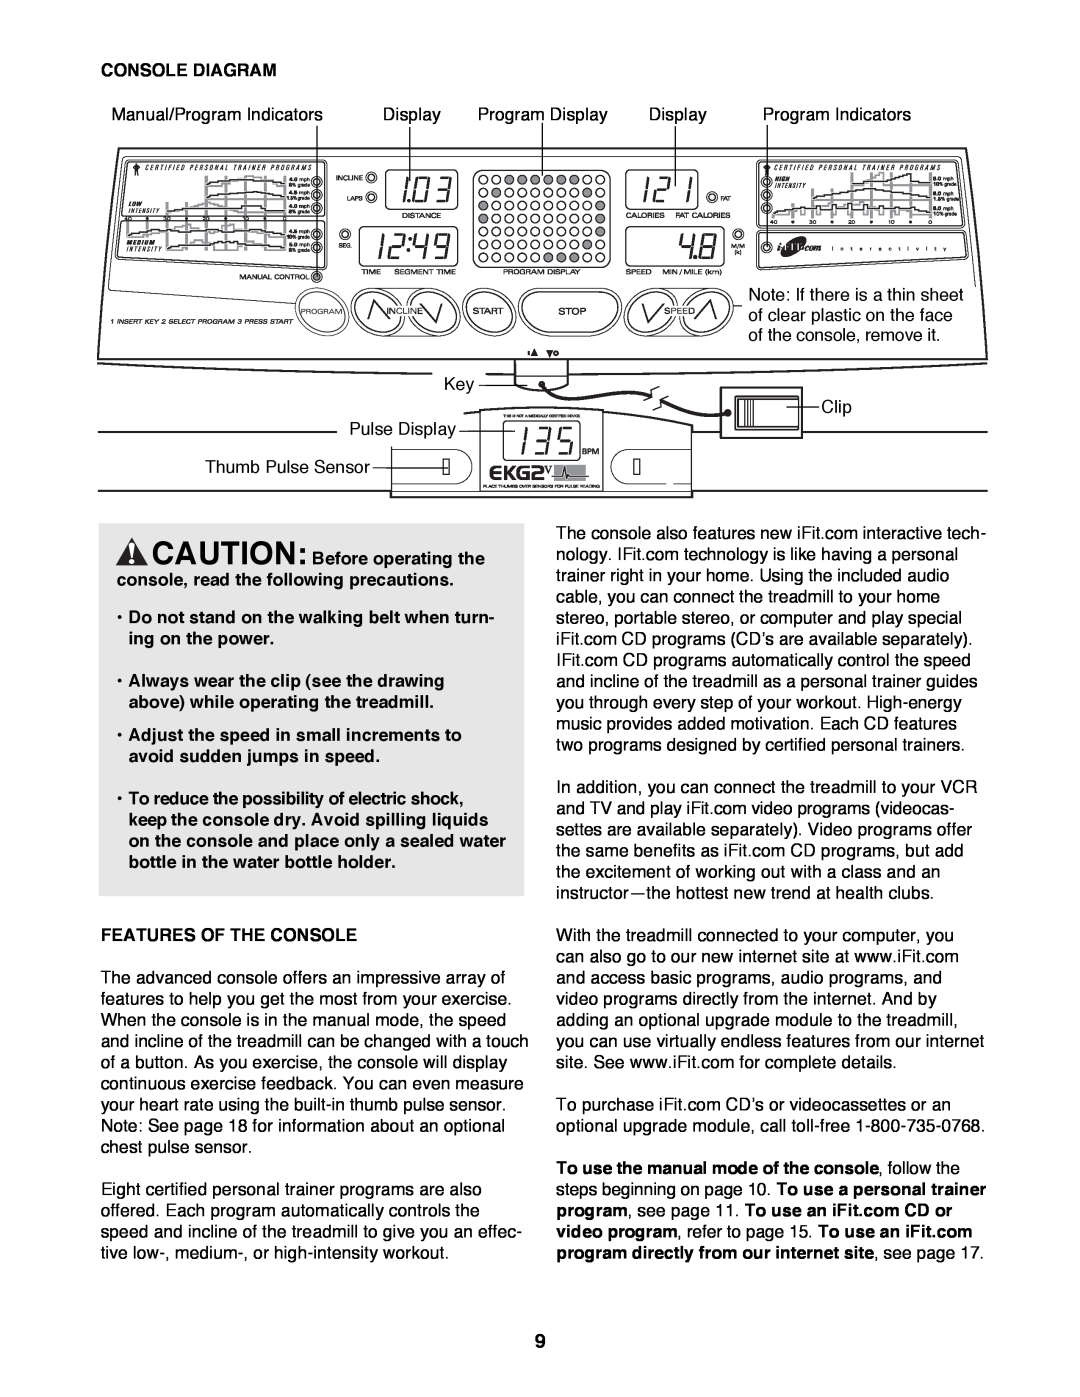 ProForm 785Pi user manual Console Diagram, CAUTION Before operating the console, read the following precautions 